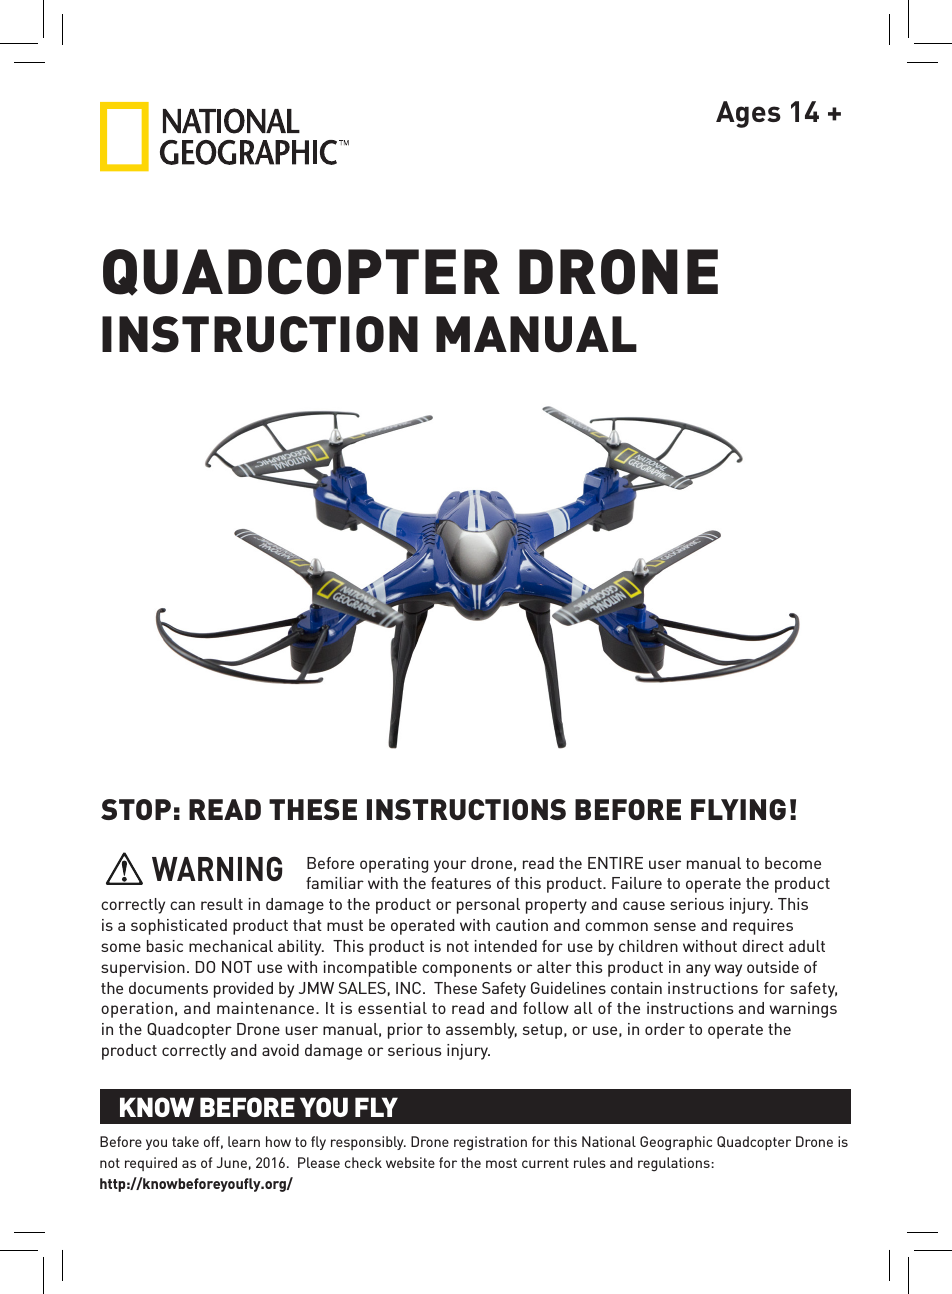 Ages 14 +QUADCOPTER DRONESTOP: READ THESE INSTRUCTIONS BEFORE FLYING!Before operating your drone, read the ENTIRE user manual to become familiar with the features of this product. Failure to operate the product correctly can result in damage to the product or personal property and cause serious injury. This is a sophisticated product that must be operated with caution and common sense and requires some basic mechanical ability.  This product is not intended for use by children without direct adult supervision. DO NOT use with incompatible components or alter this product in any way outside of the documents provided by JMW SALES, INC.  These Safety Guidelines contain instructions for safety, operation, and maintenance. It is essential to read and follow all of the instructions and warnings in the Quadcopter Drone user manual, prior to assembly, setup, or use, in order to operate the product correctly and avoid damage or serious injury.INSTRUCTION MANUALBefore you take off, learn how to ﬂy responsibly. Drone registration for this National Geographic Quadcopter Drone is not required as of June, 2016.  Please check website for the most current rules and regulations:  http://knowbeforeyouﬂy.org/KNOW BEFORE YOU FLYKNOW BEFORE YOU FLYWARNING